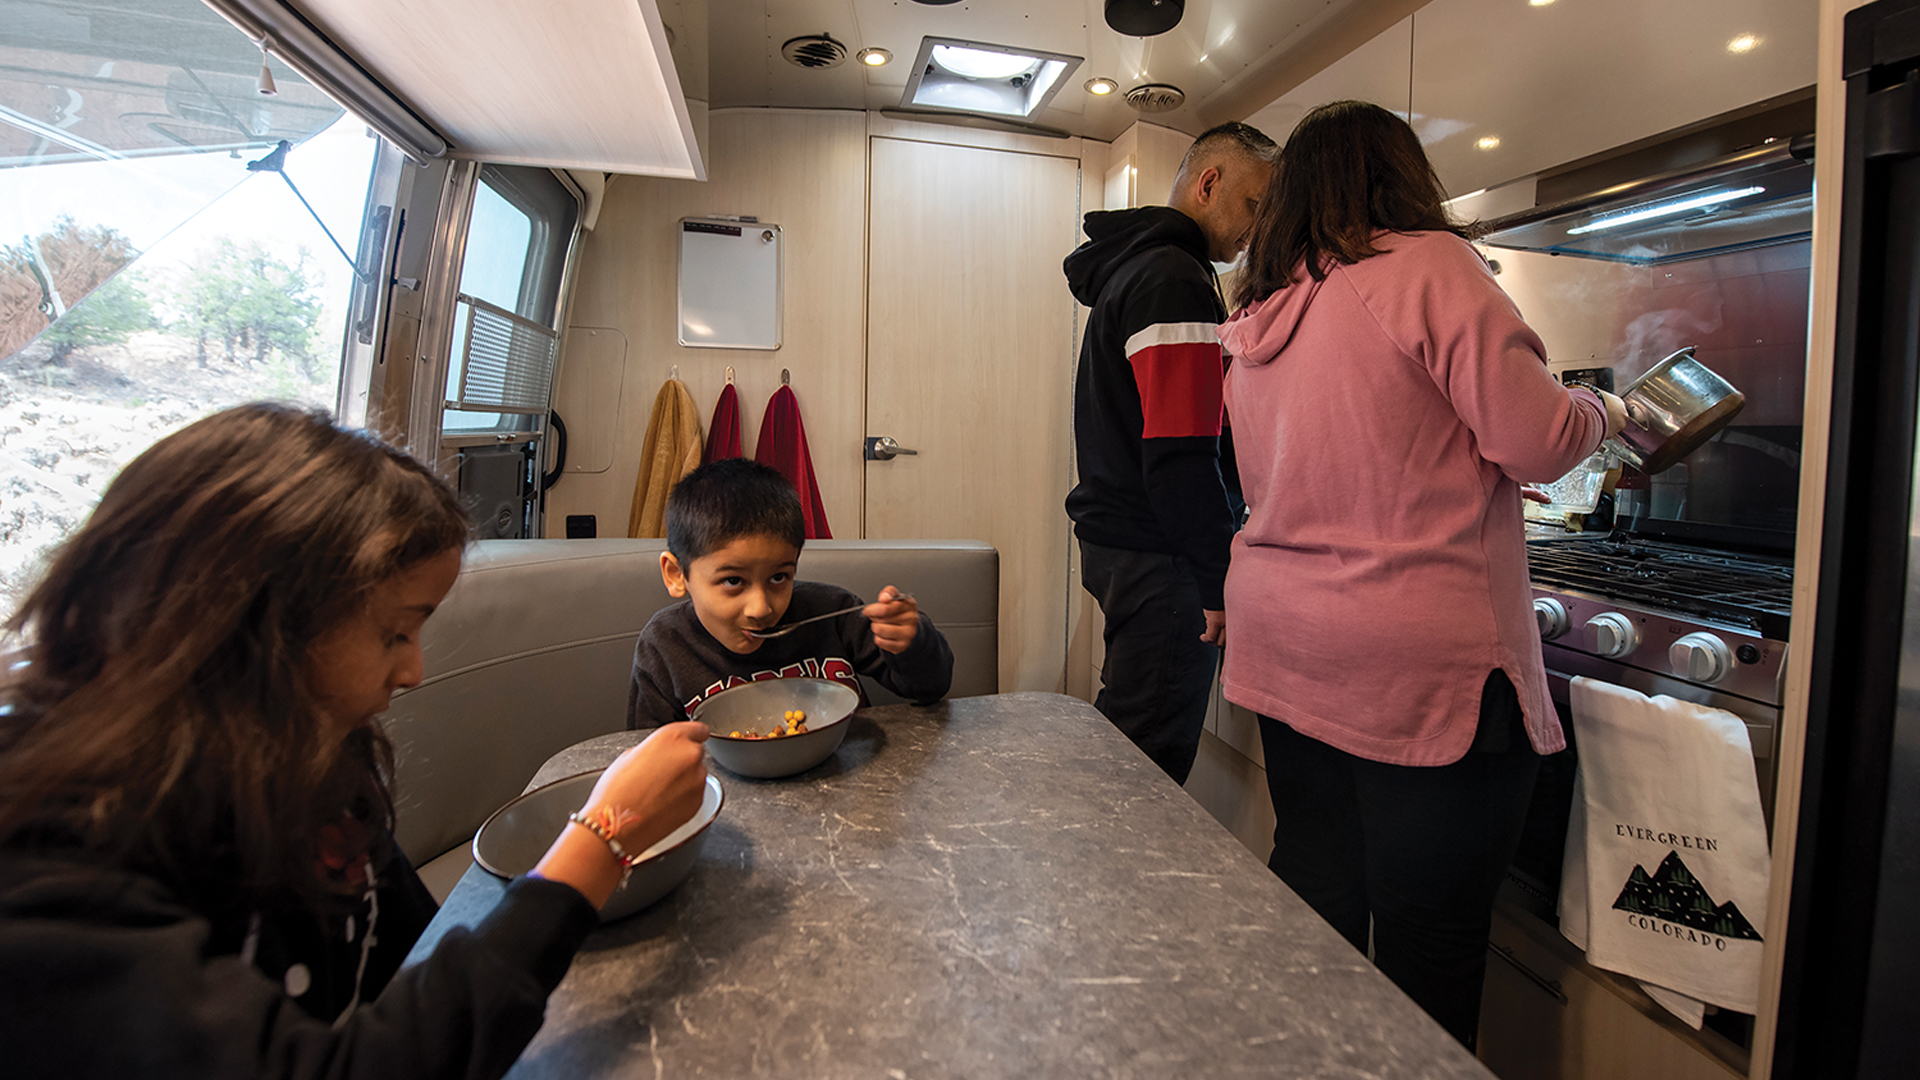 Two kids sitting at a dinette table in an Airstream travel trailer while their parents are cleaning dishes in the kitchen